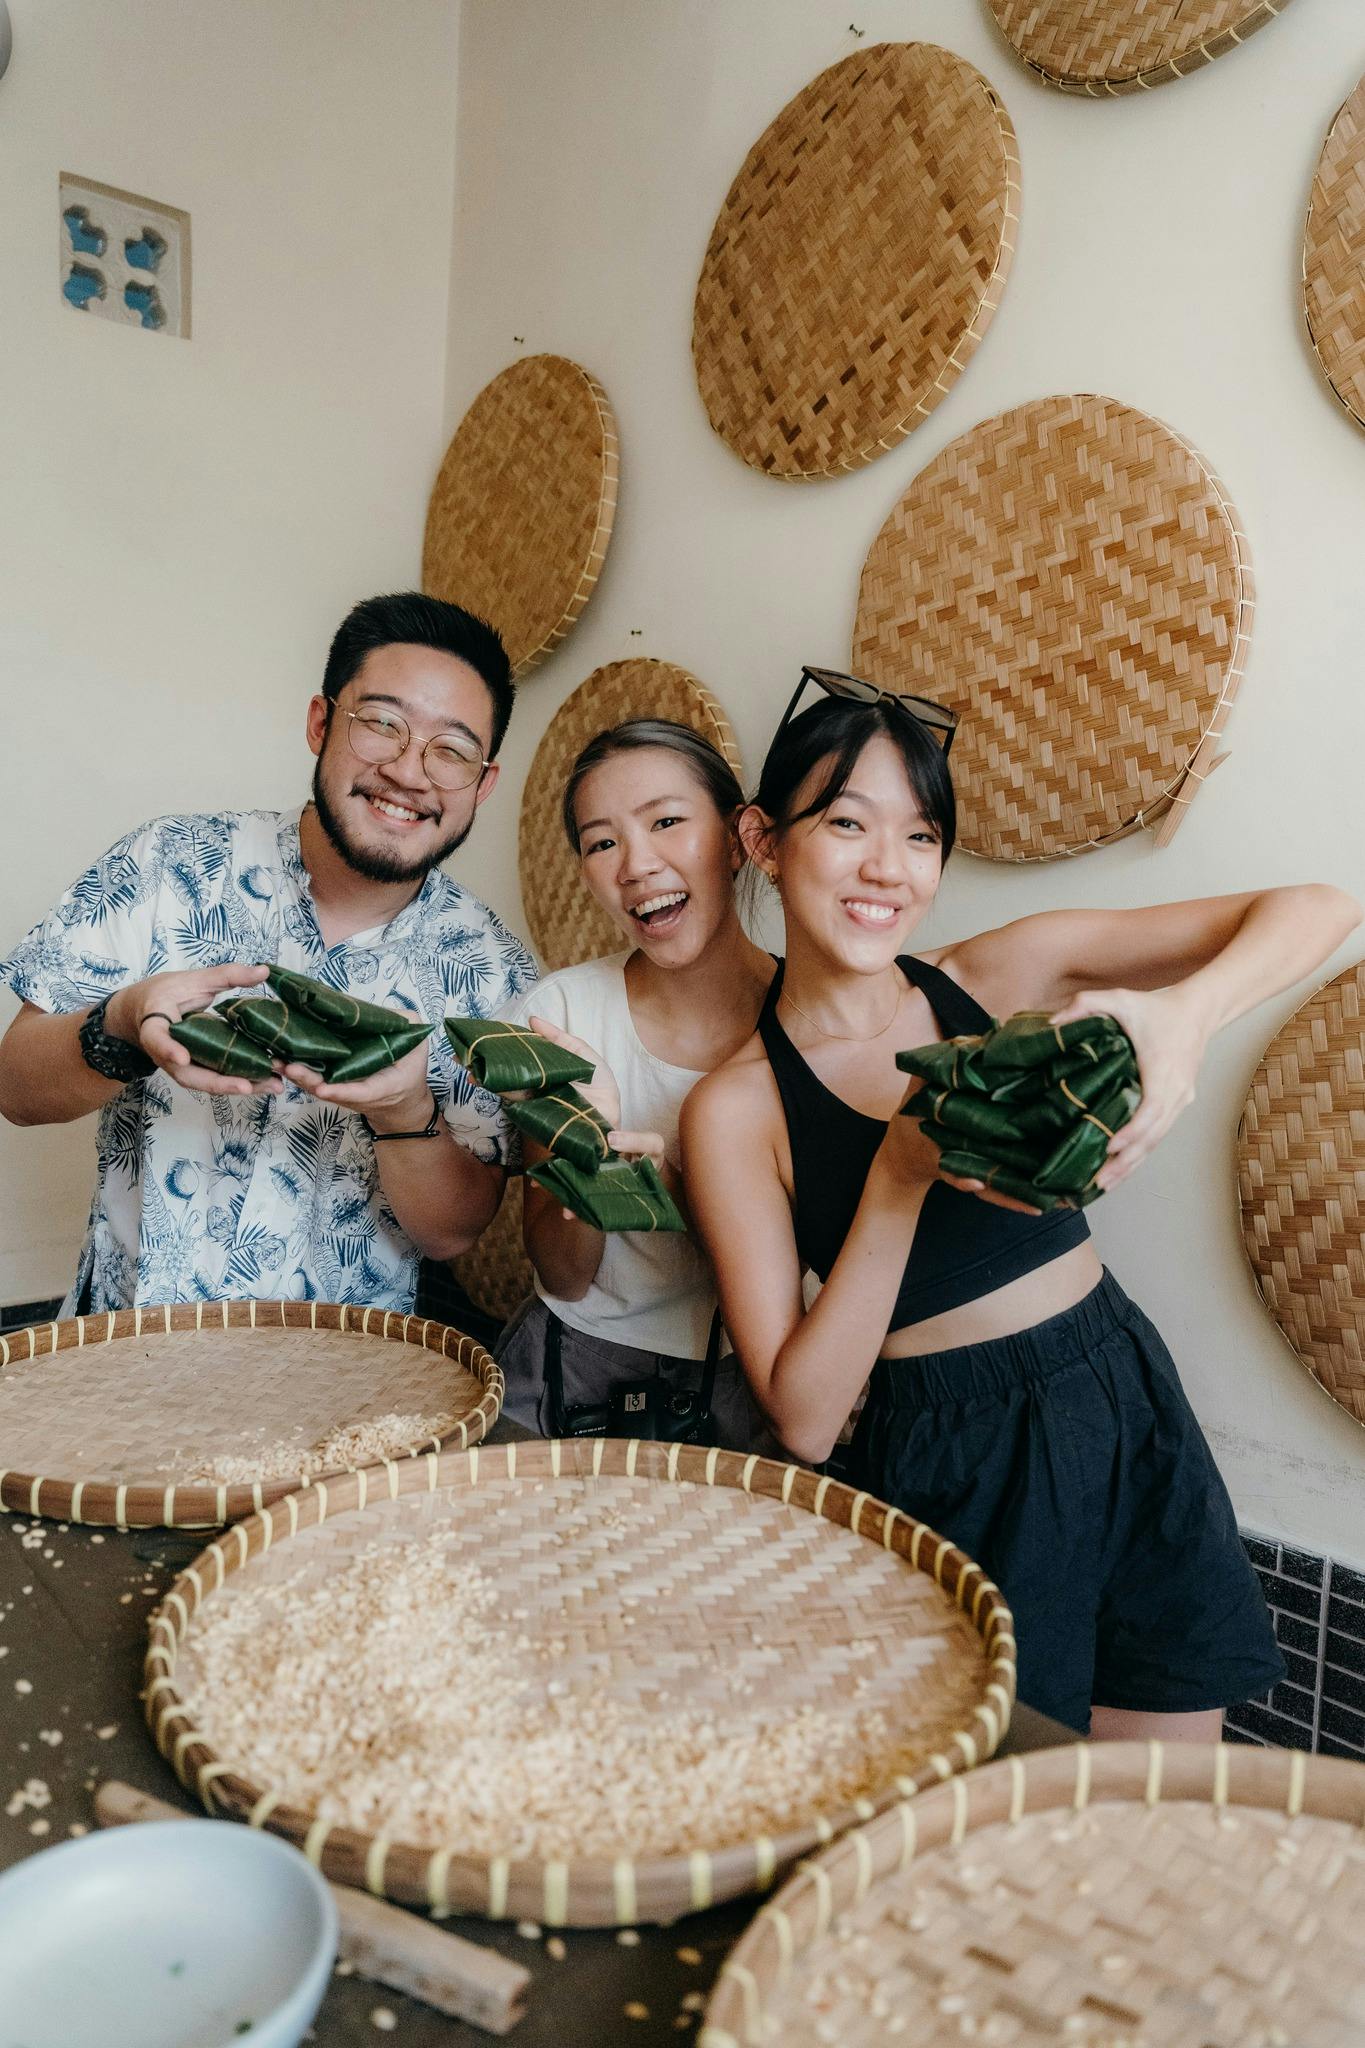 Us showing off our handmade Tempe!